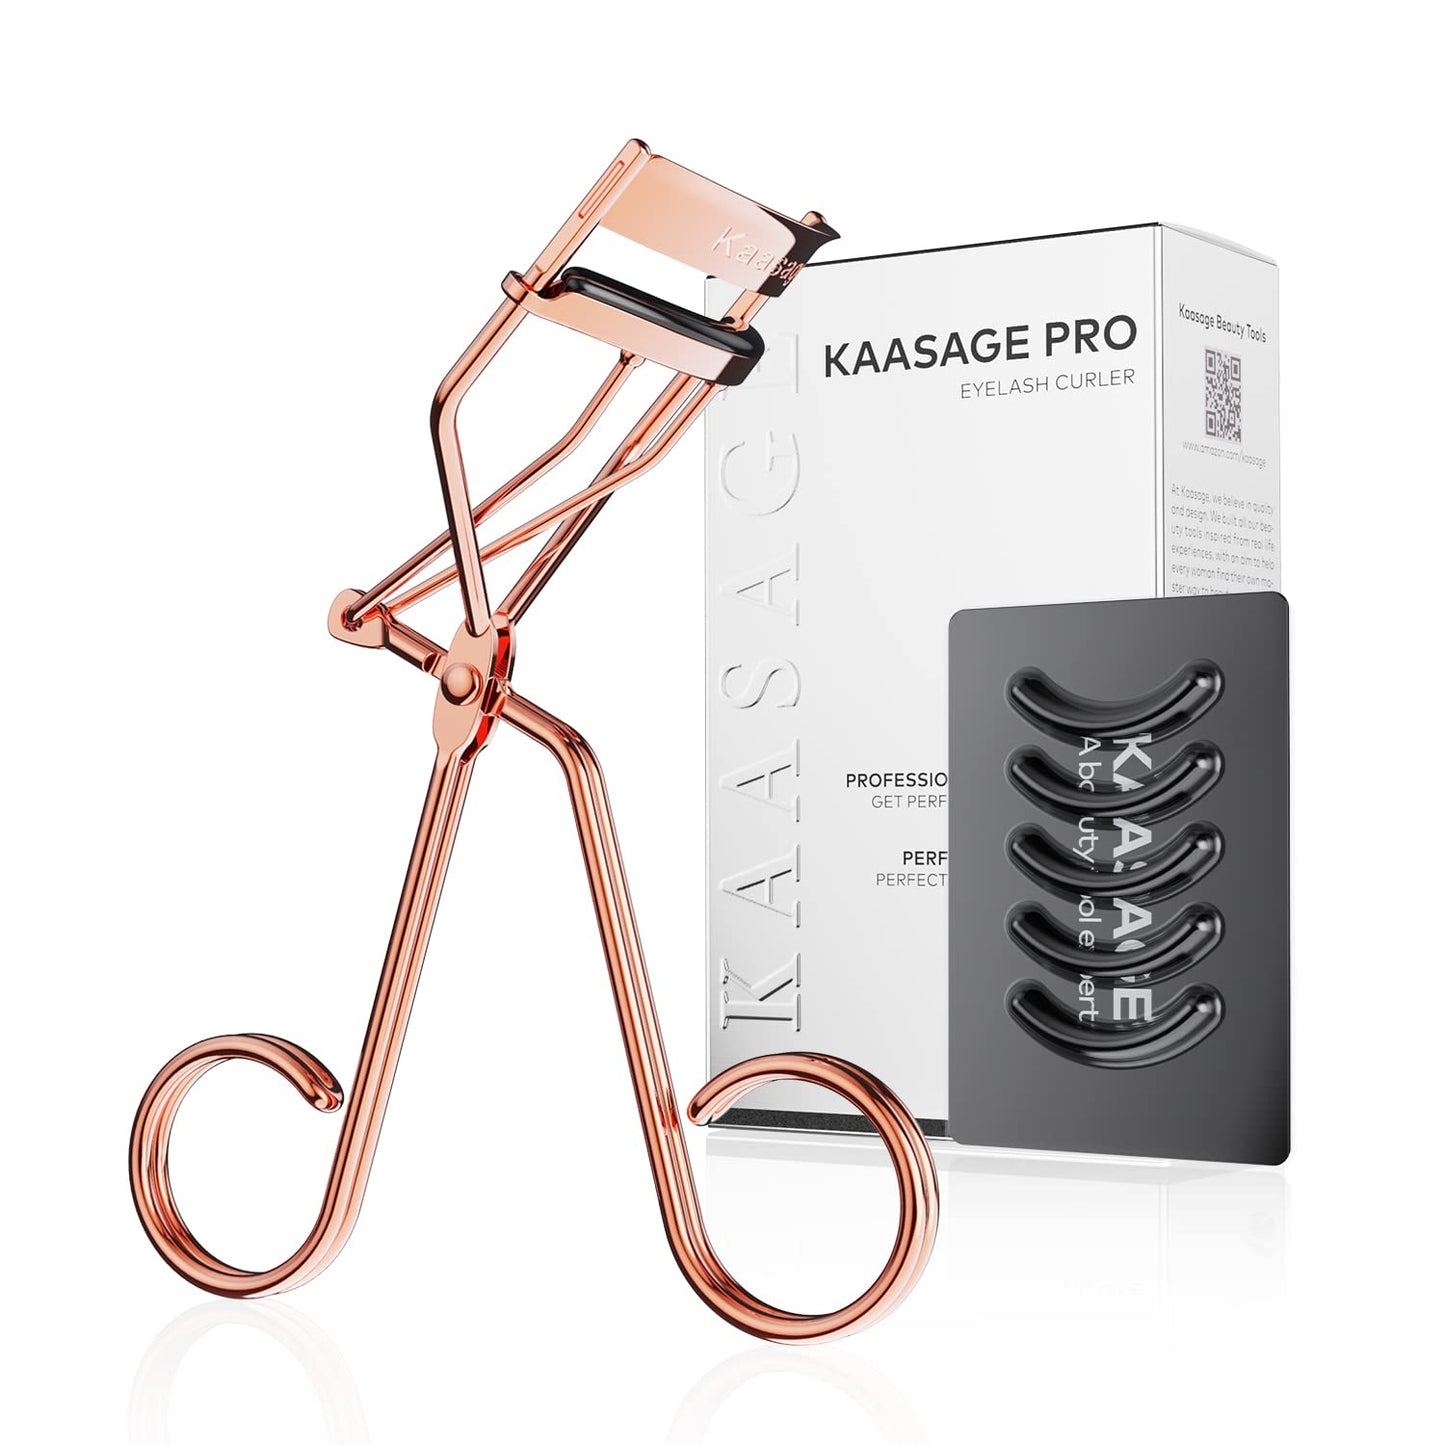 Kaasage Eyelash Curler for Women - Golden Professional Lash Curler with Refill Silicone Pads.